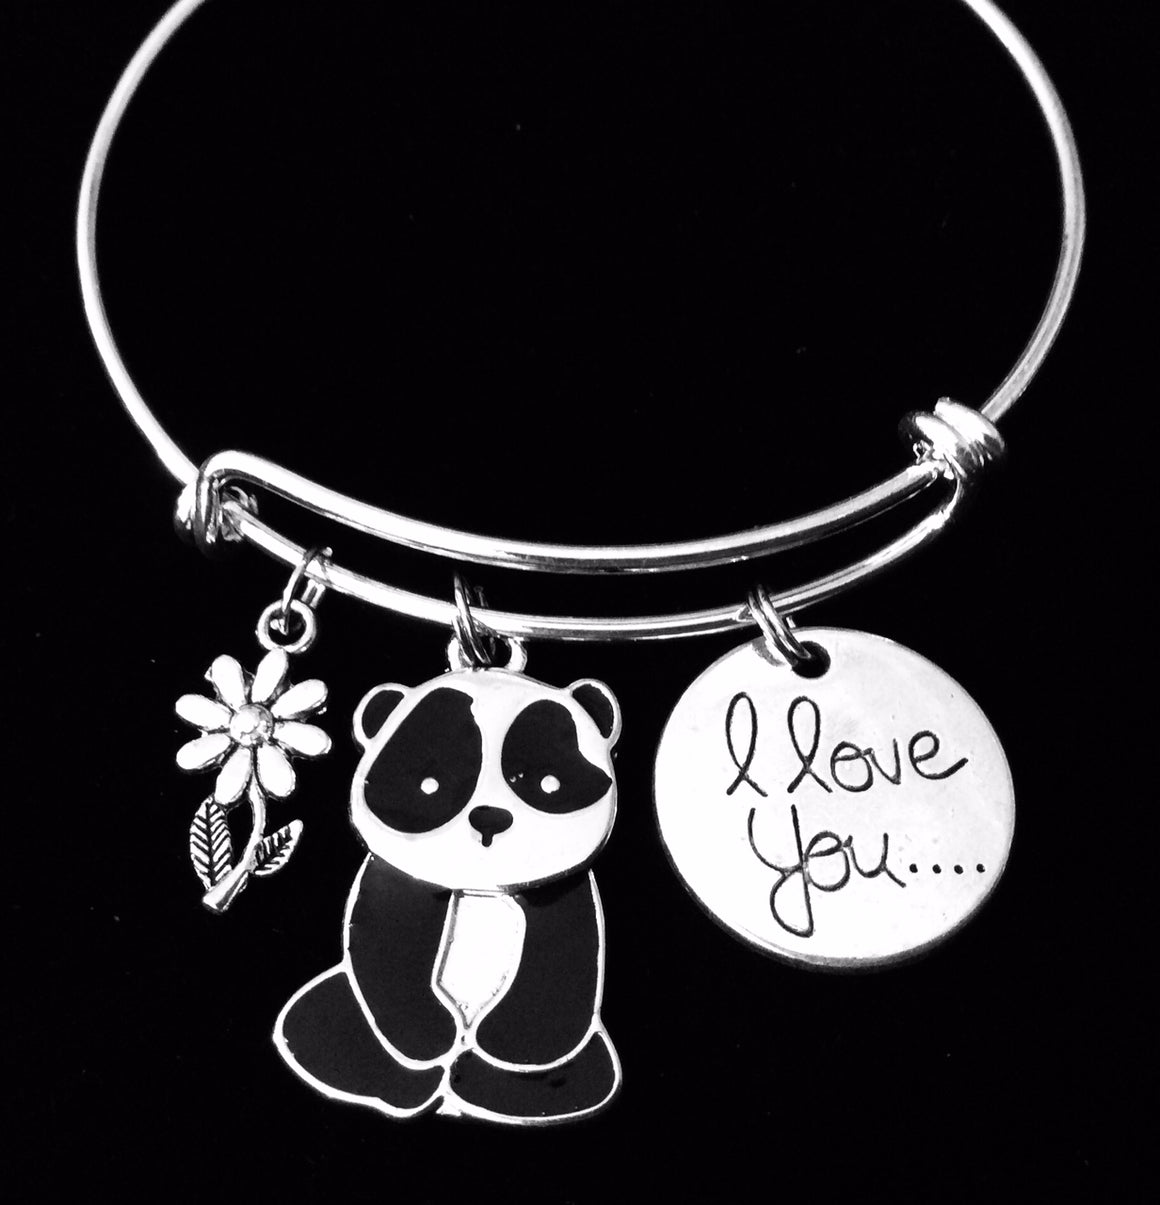 I Love you Panda Women's Charm Bracelet Silver Expandable Adjustable Bangle One Size Fits All Gift